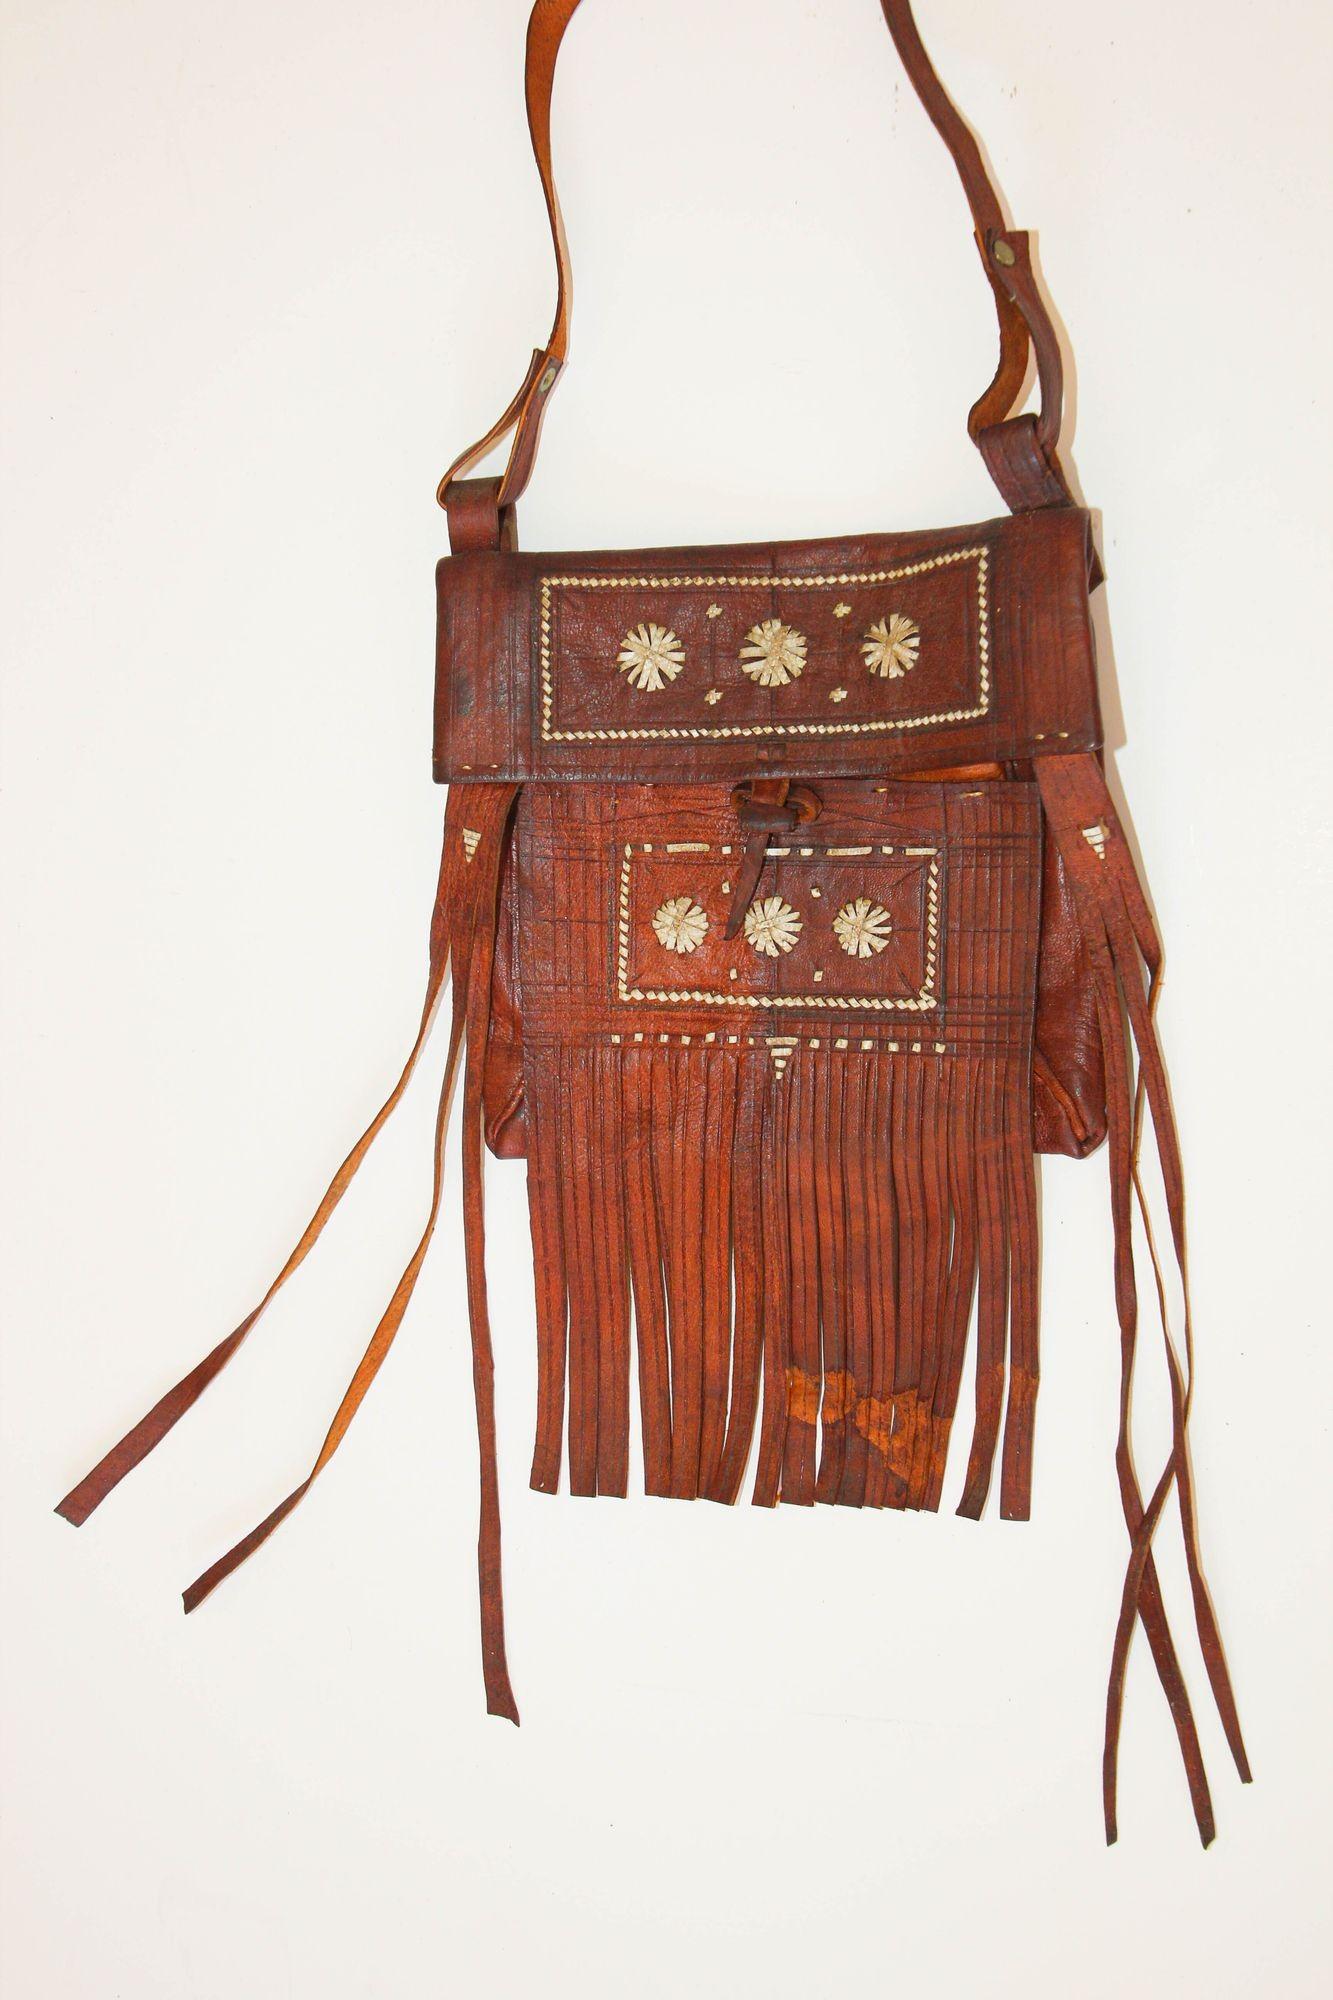 Vintage African Moroccan leather handcrafted Tuareg bag with fringes. Wall decorative Art.
Collectible vintage Real work of art hand made by the Berber tribes of Morocco.
Tightly hand woven colorful leather strips make up an intricate geometric